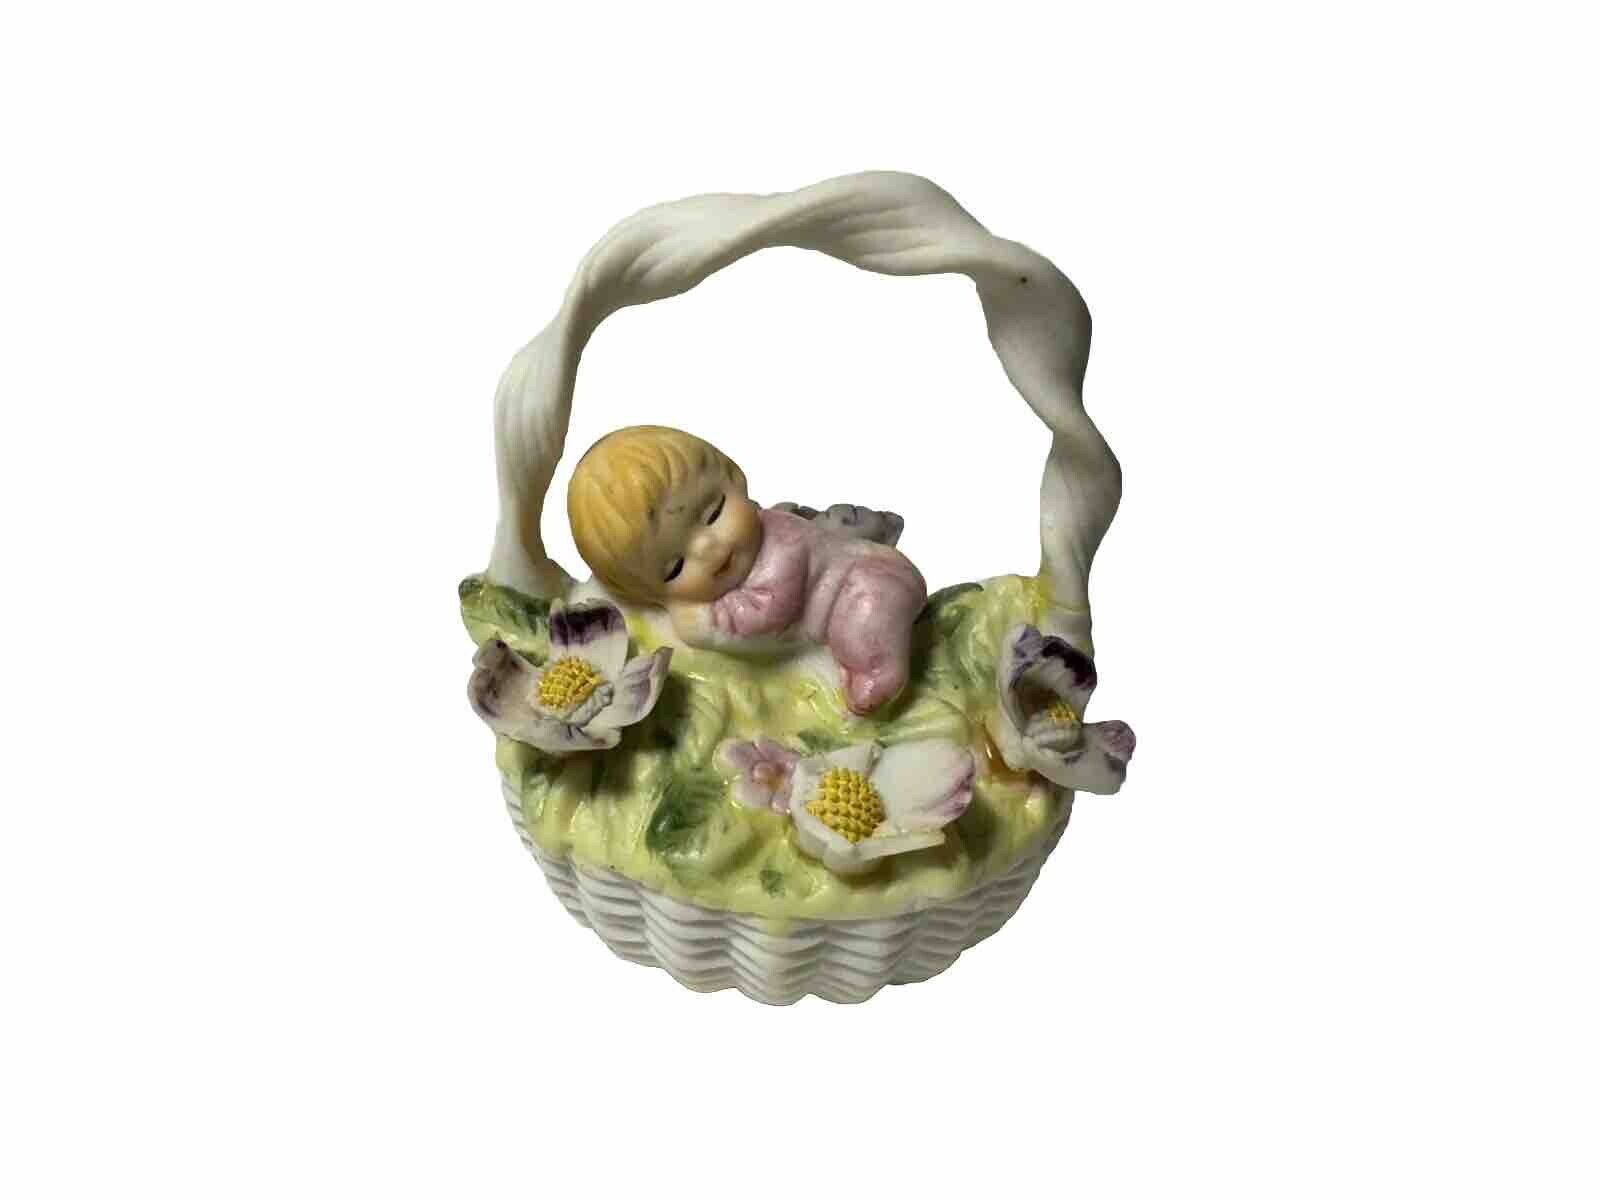 Vintage Lefton Ceramic Woven Basket With Baby Napping In Flowers